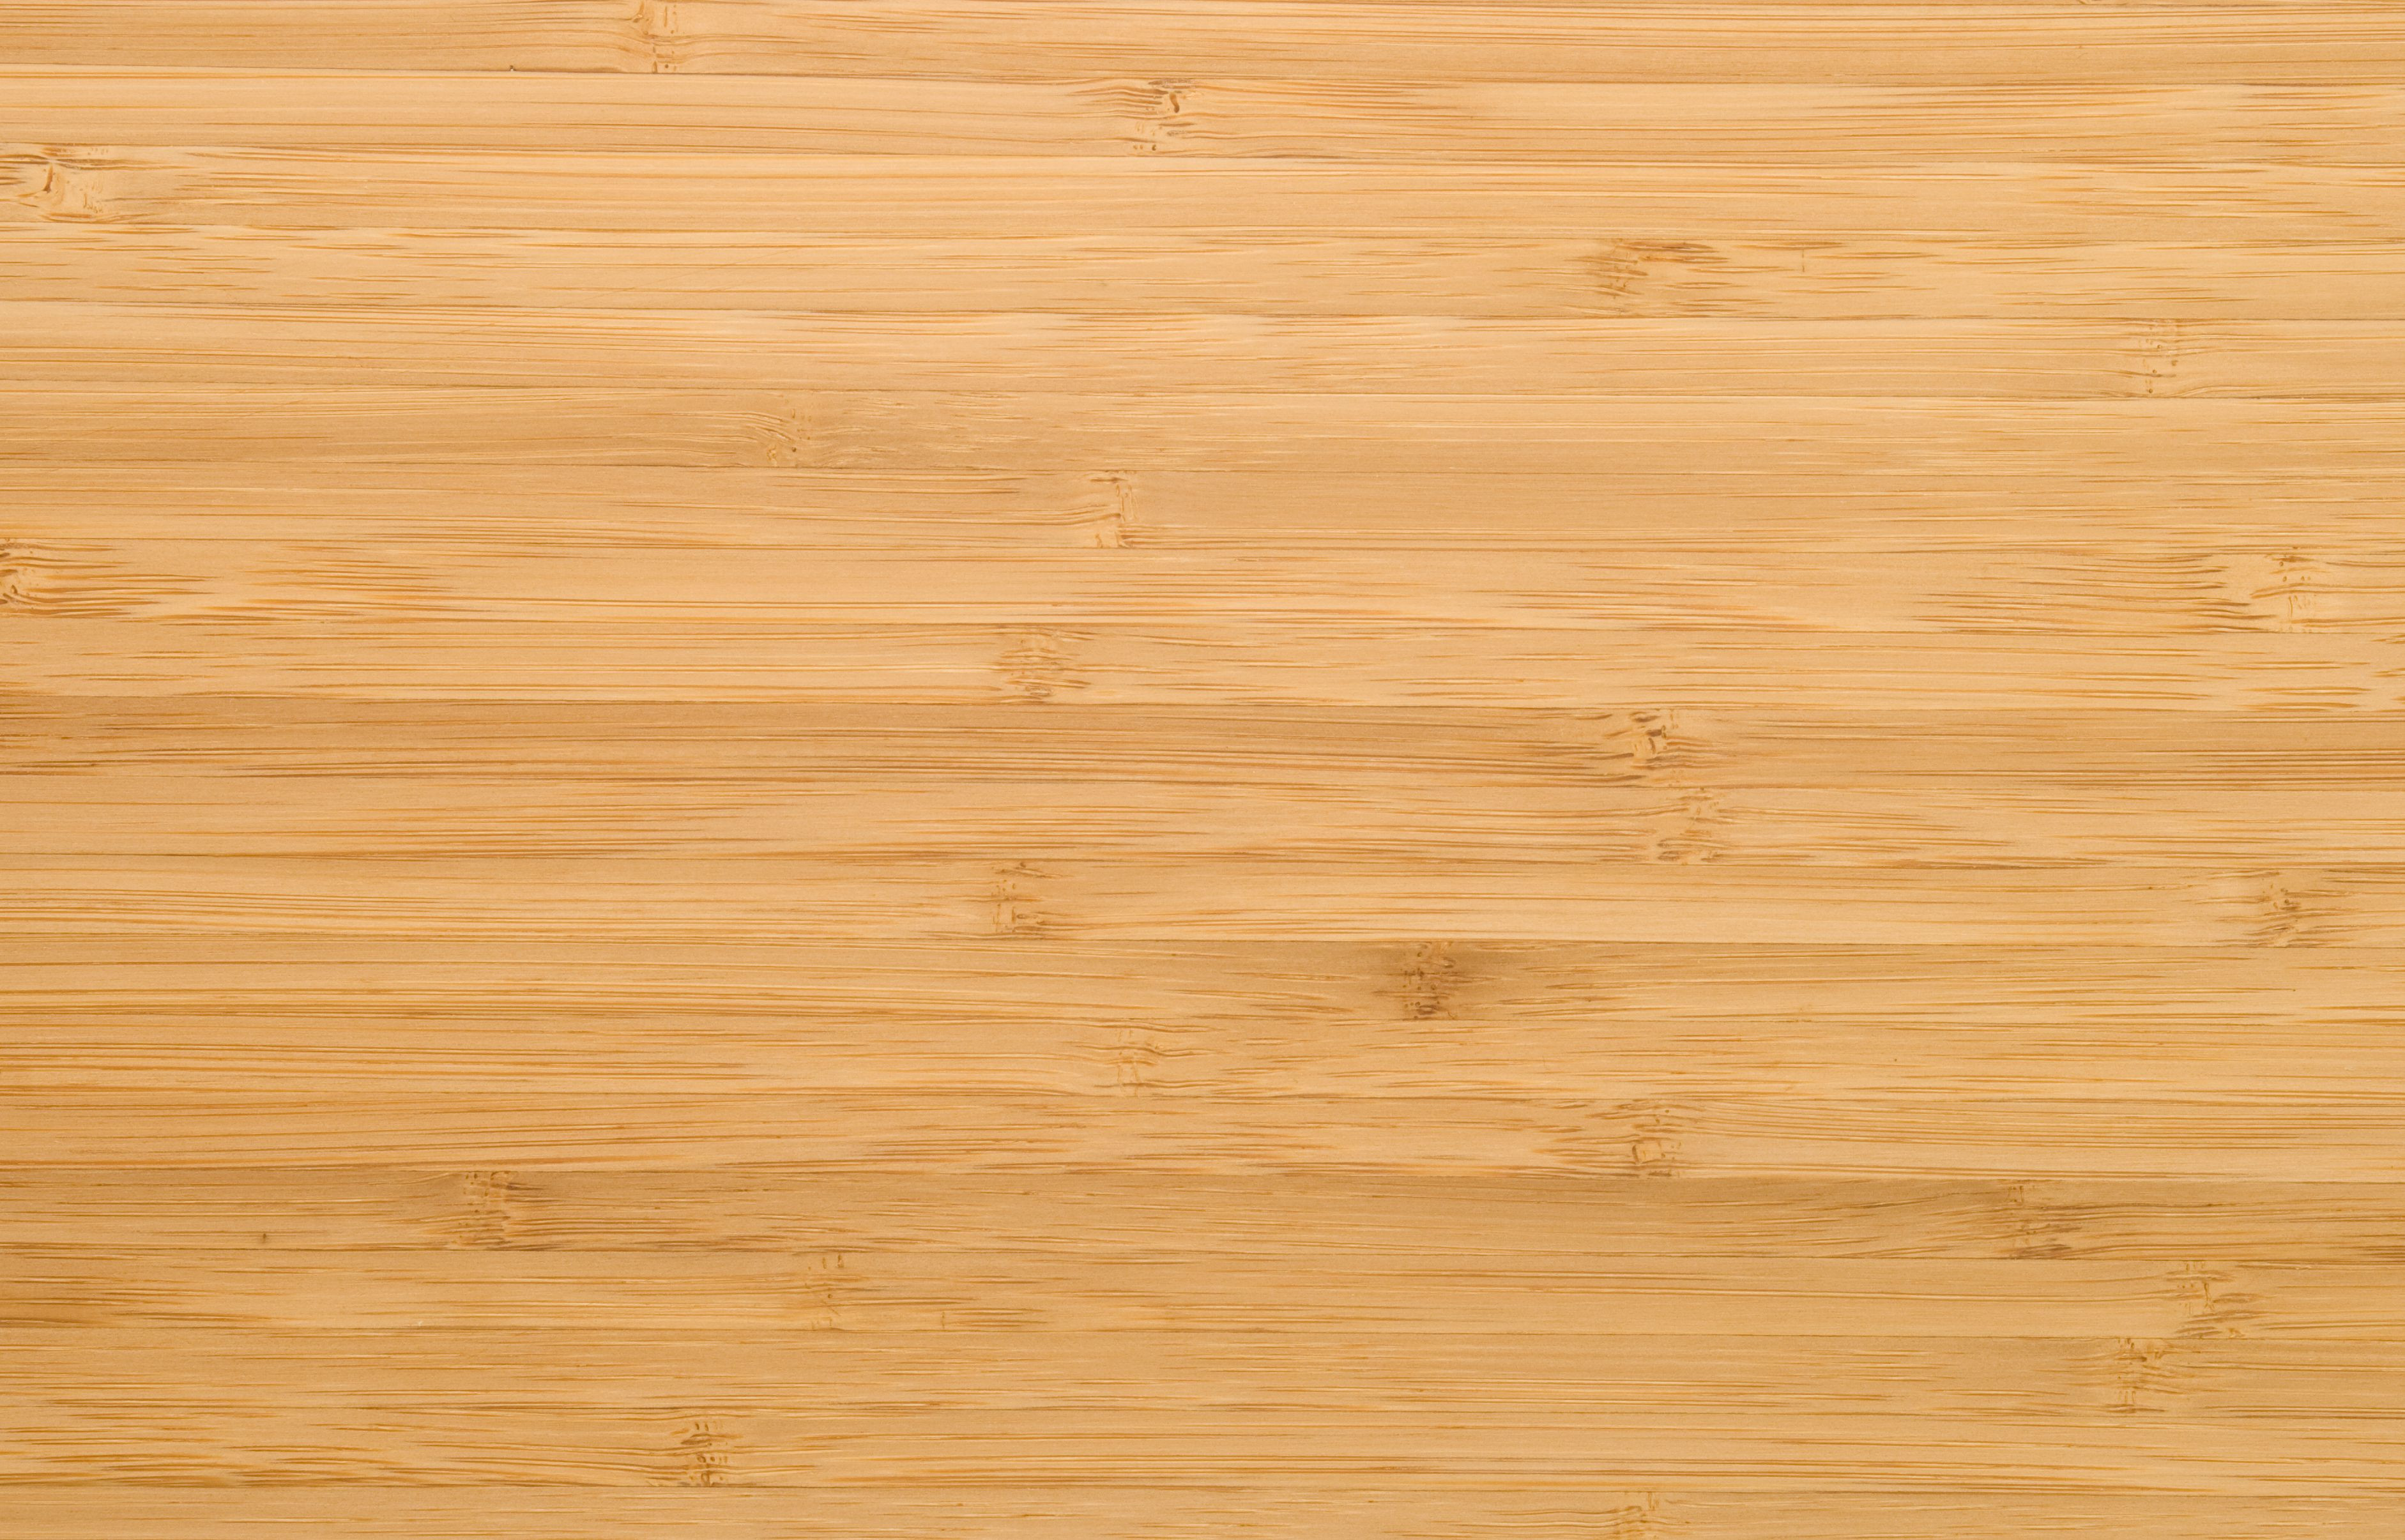 10 Awesome Hardwood Floor Lacquer Finish 2024 free download hardwood floor lacquer finish of can you use a wet mop on bamboo floors throughout natural bamboo plank 94259870 59aeefd4519de20010d5c648